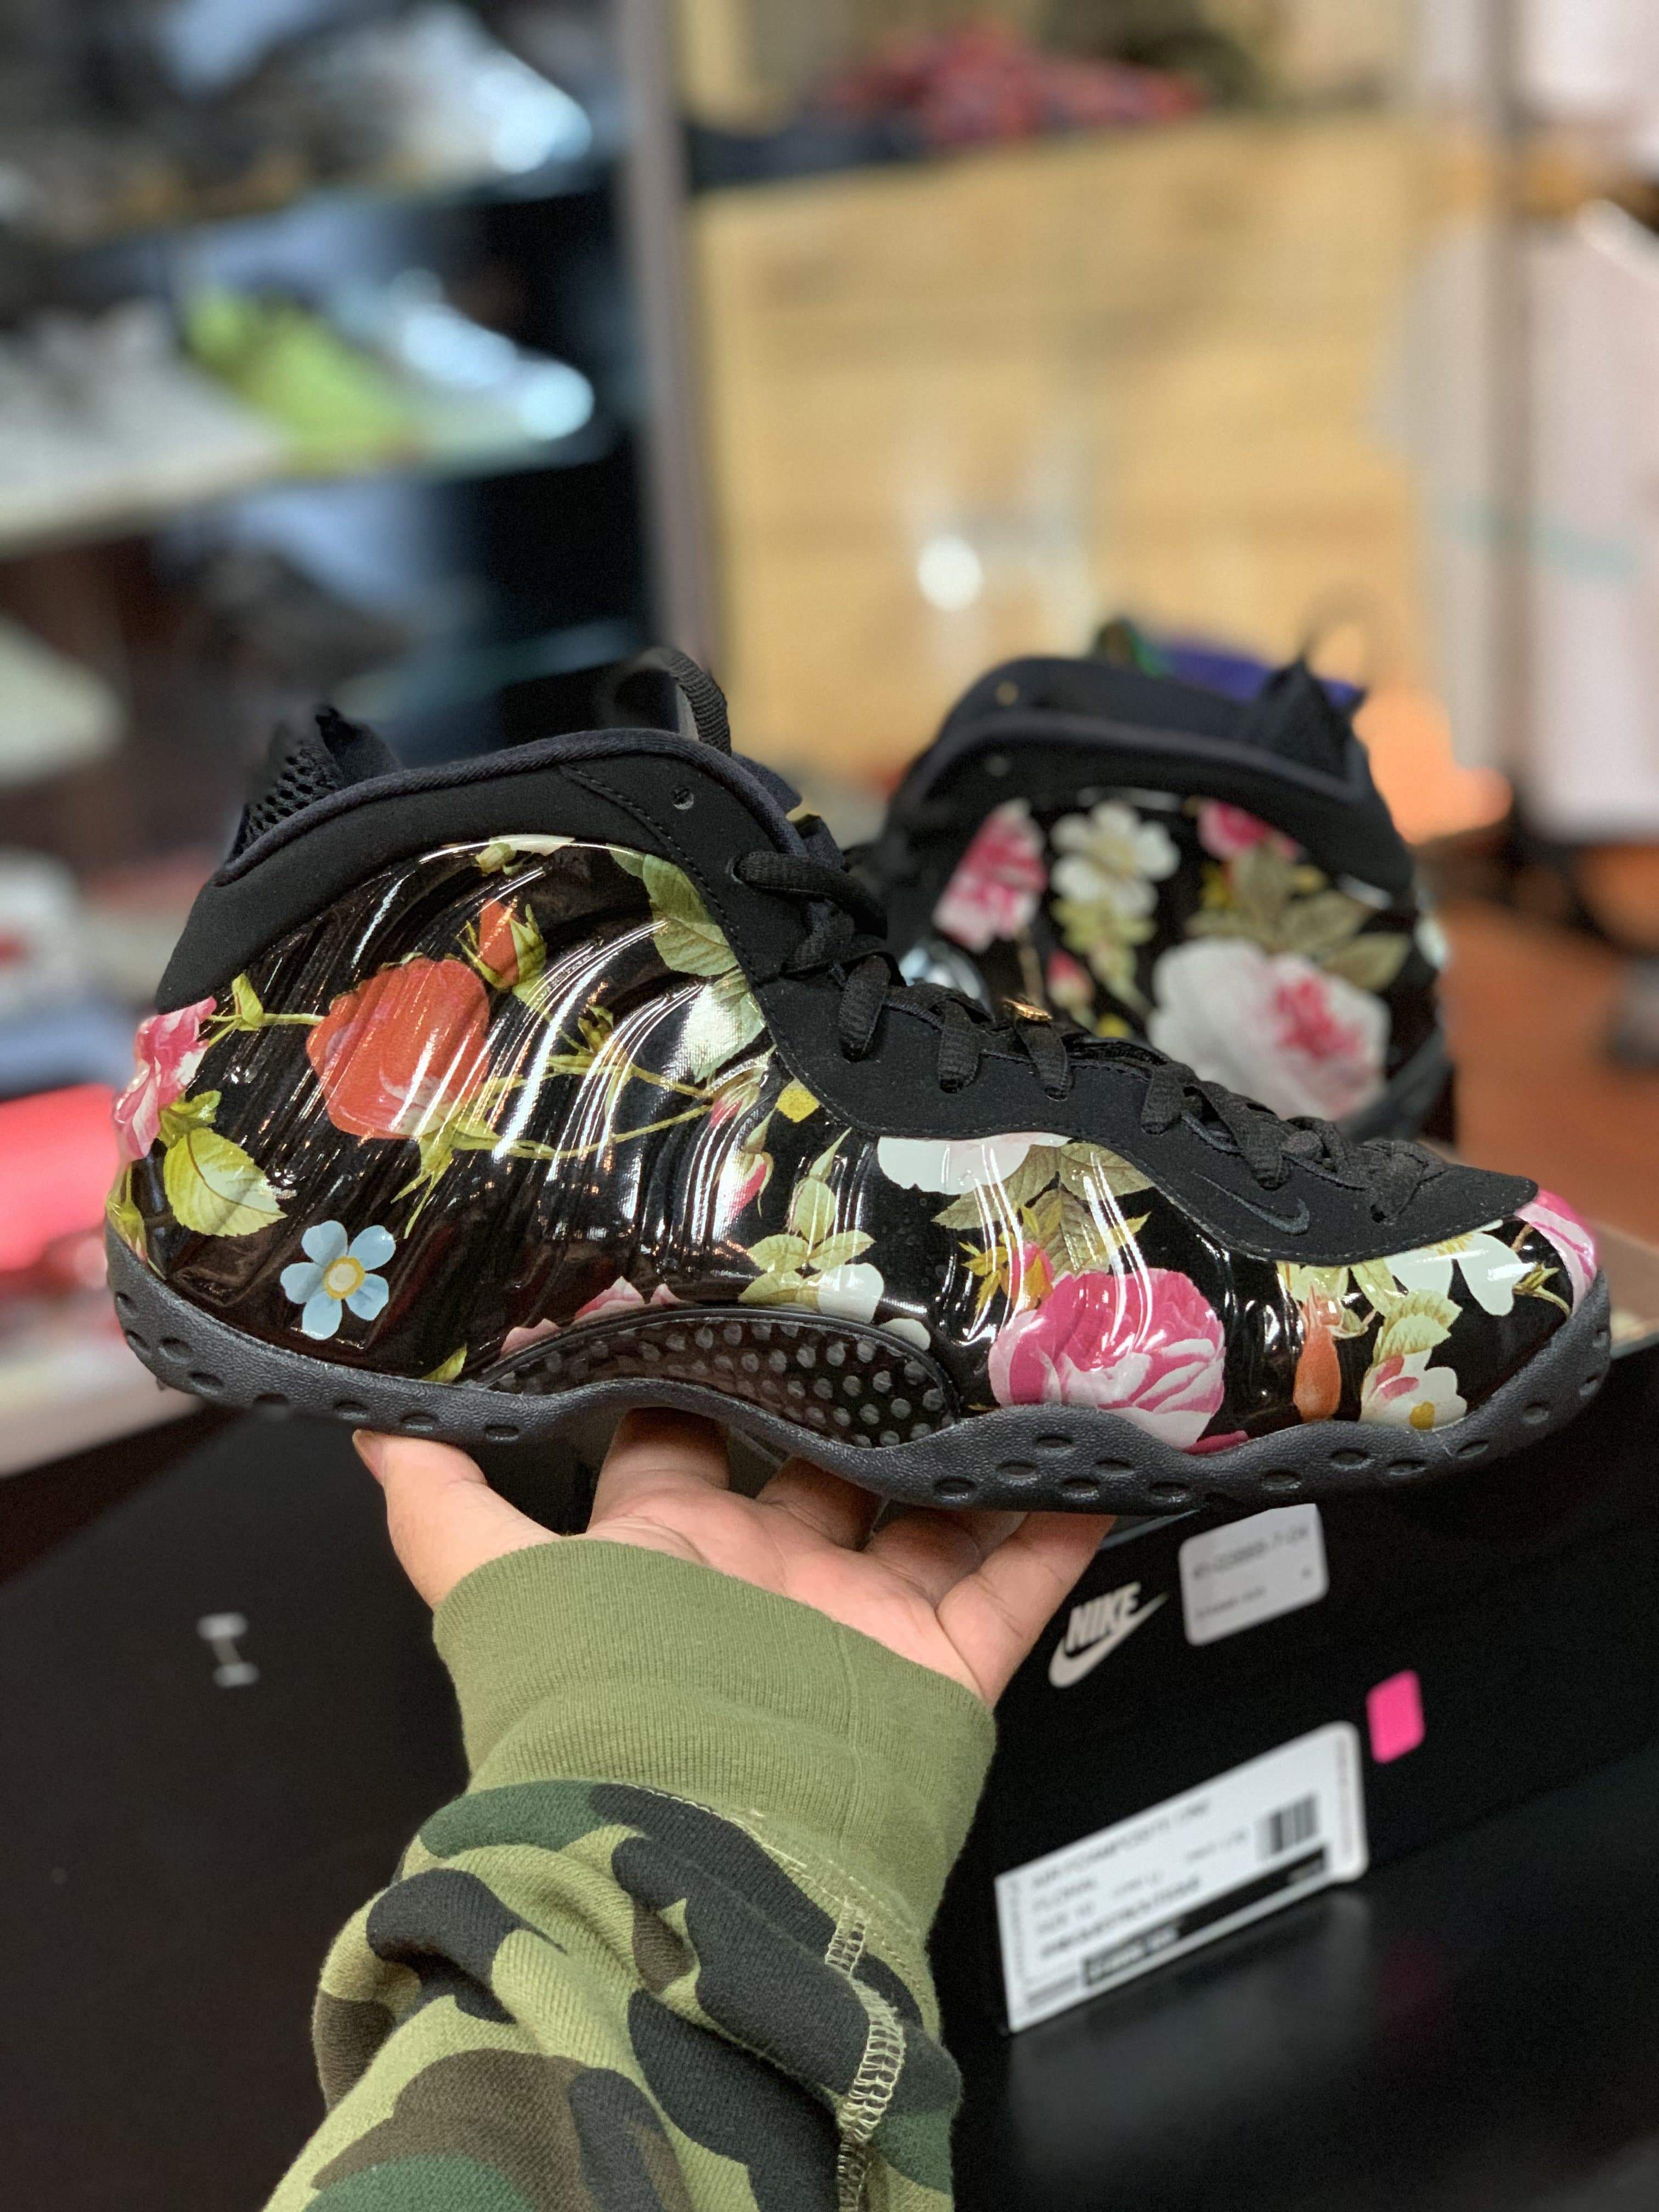 Nike Air Foamposite One “Floral”